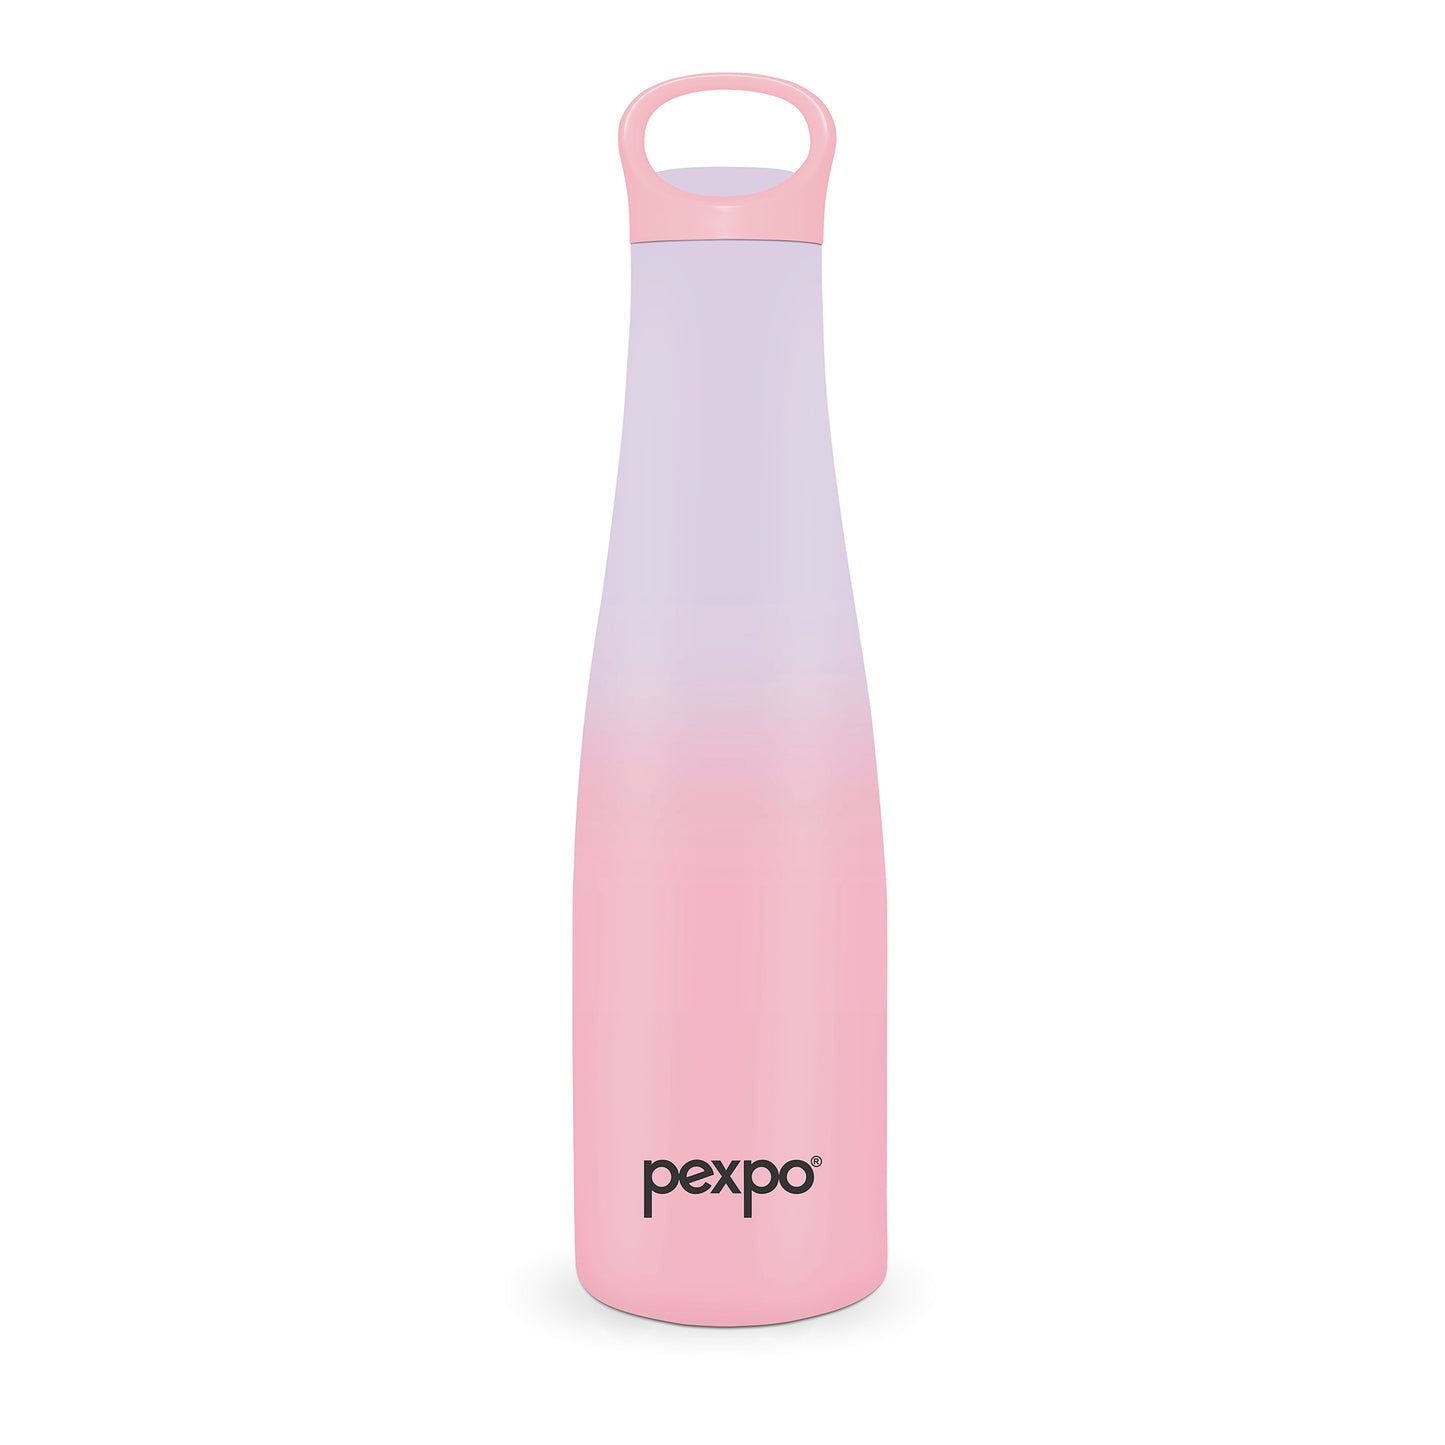 Pexpo Morocco- Stainless Steel Vacuum Insulated Bottle | 24/7 Hot & Cold| Ideal for Gifting & Complies with BIS| eco-friendly|